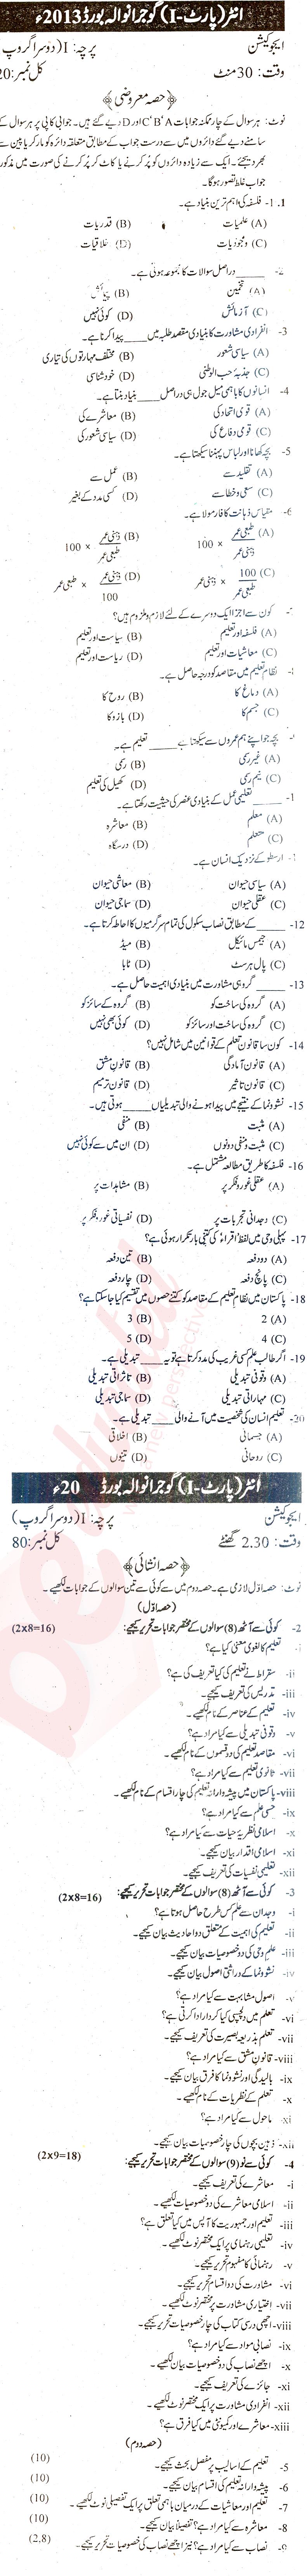 Education FA Part 1 Past Paper Group 2 BISE Gujranwala 2013